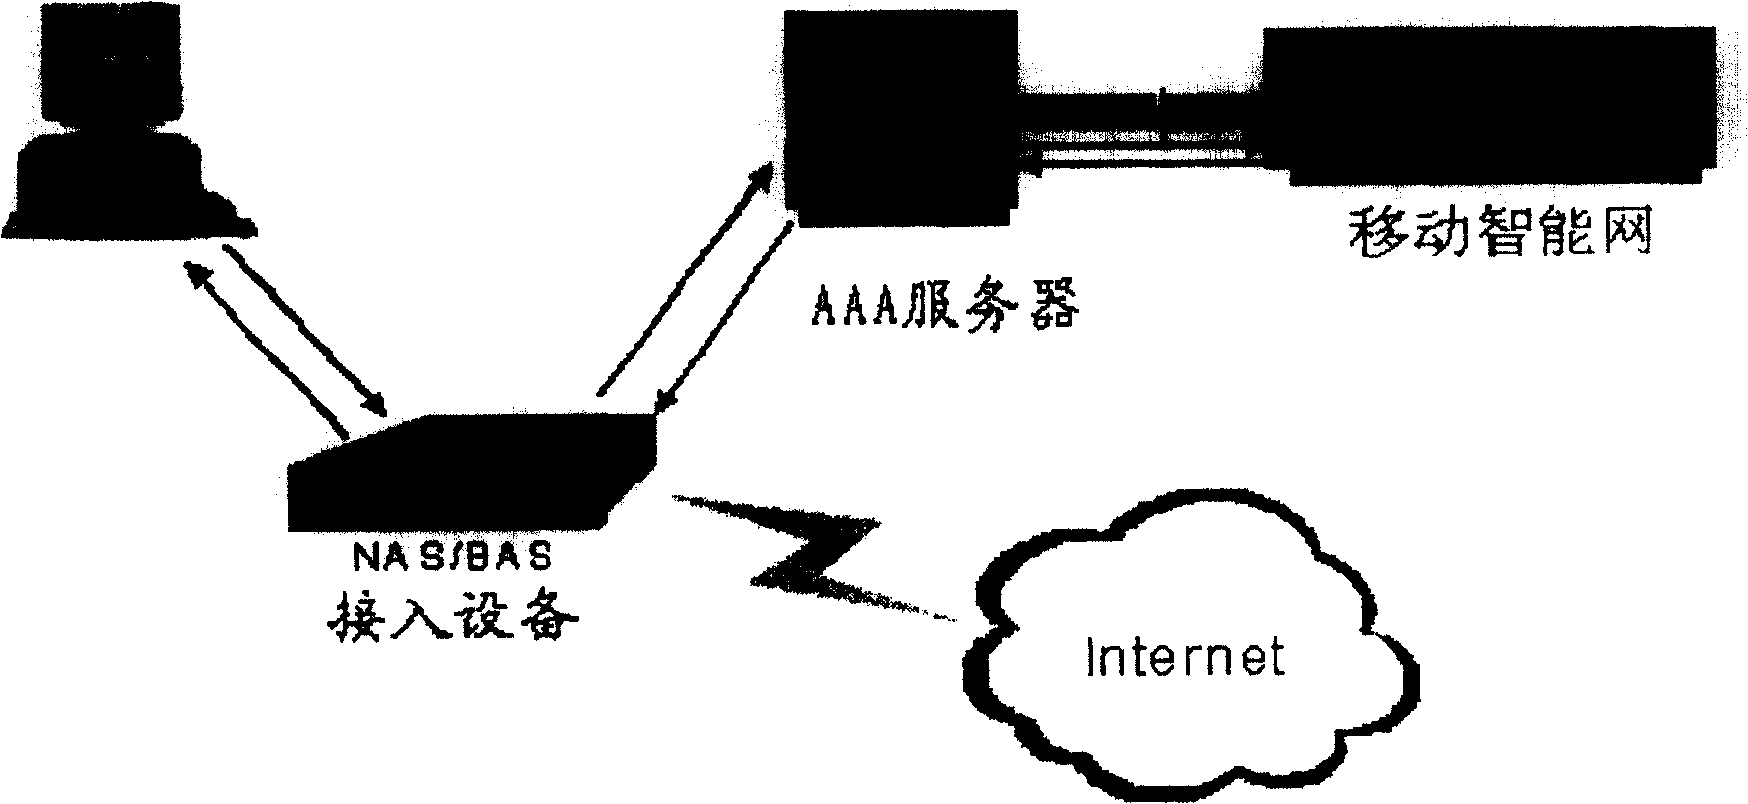 Realizing method for mobile phone user to access to internet